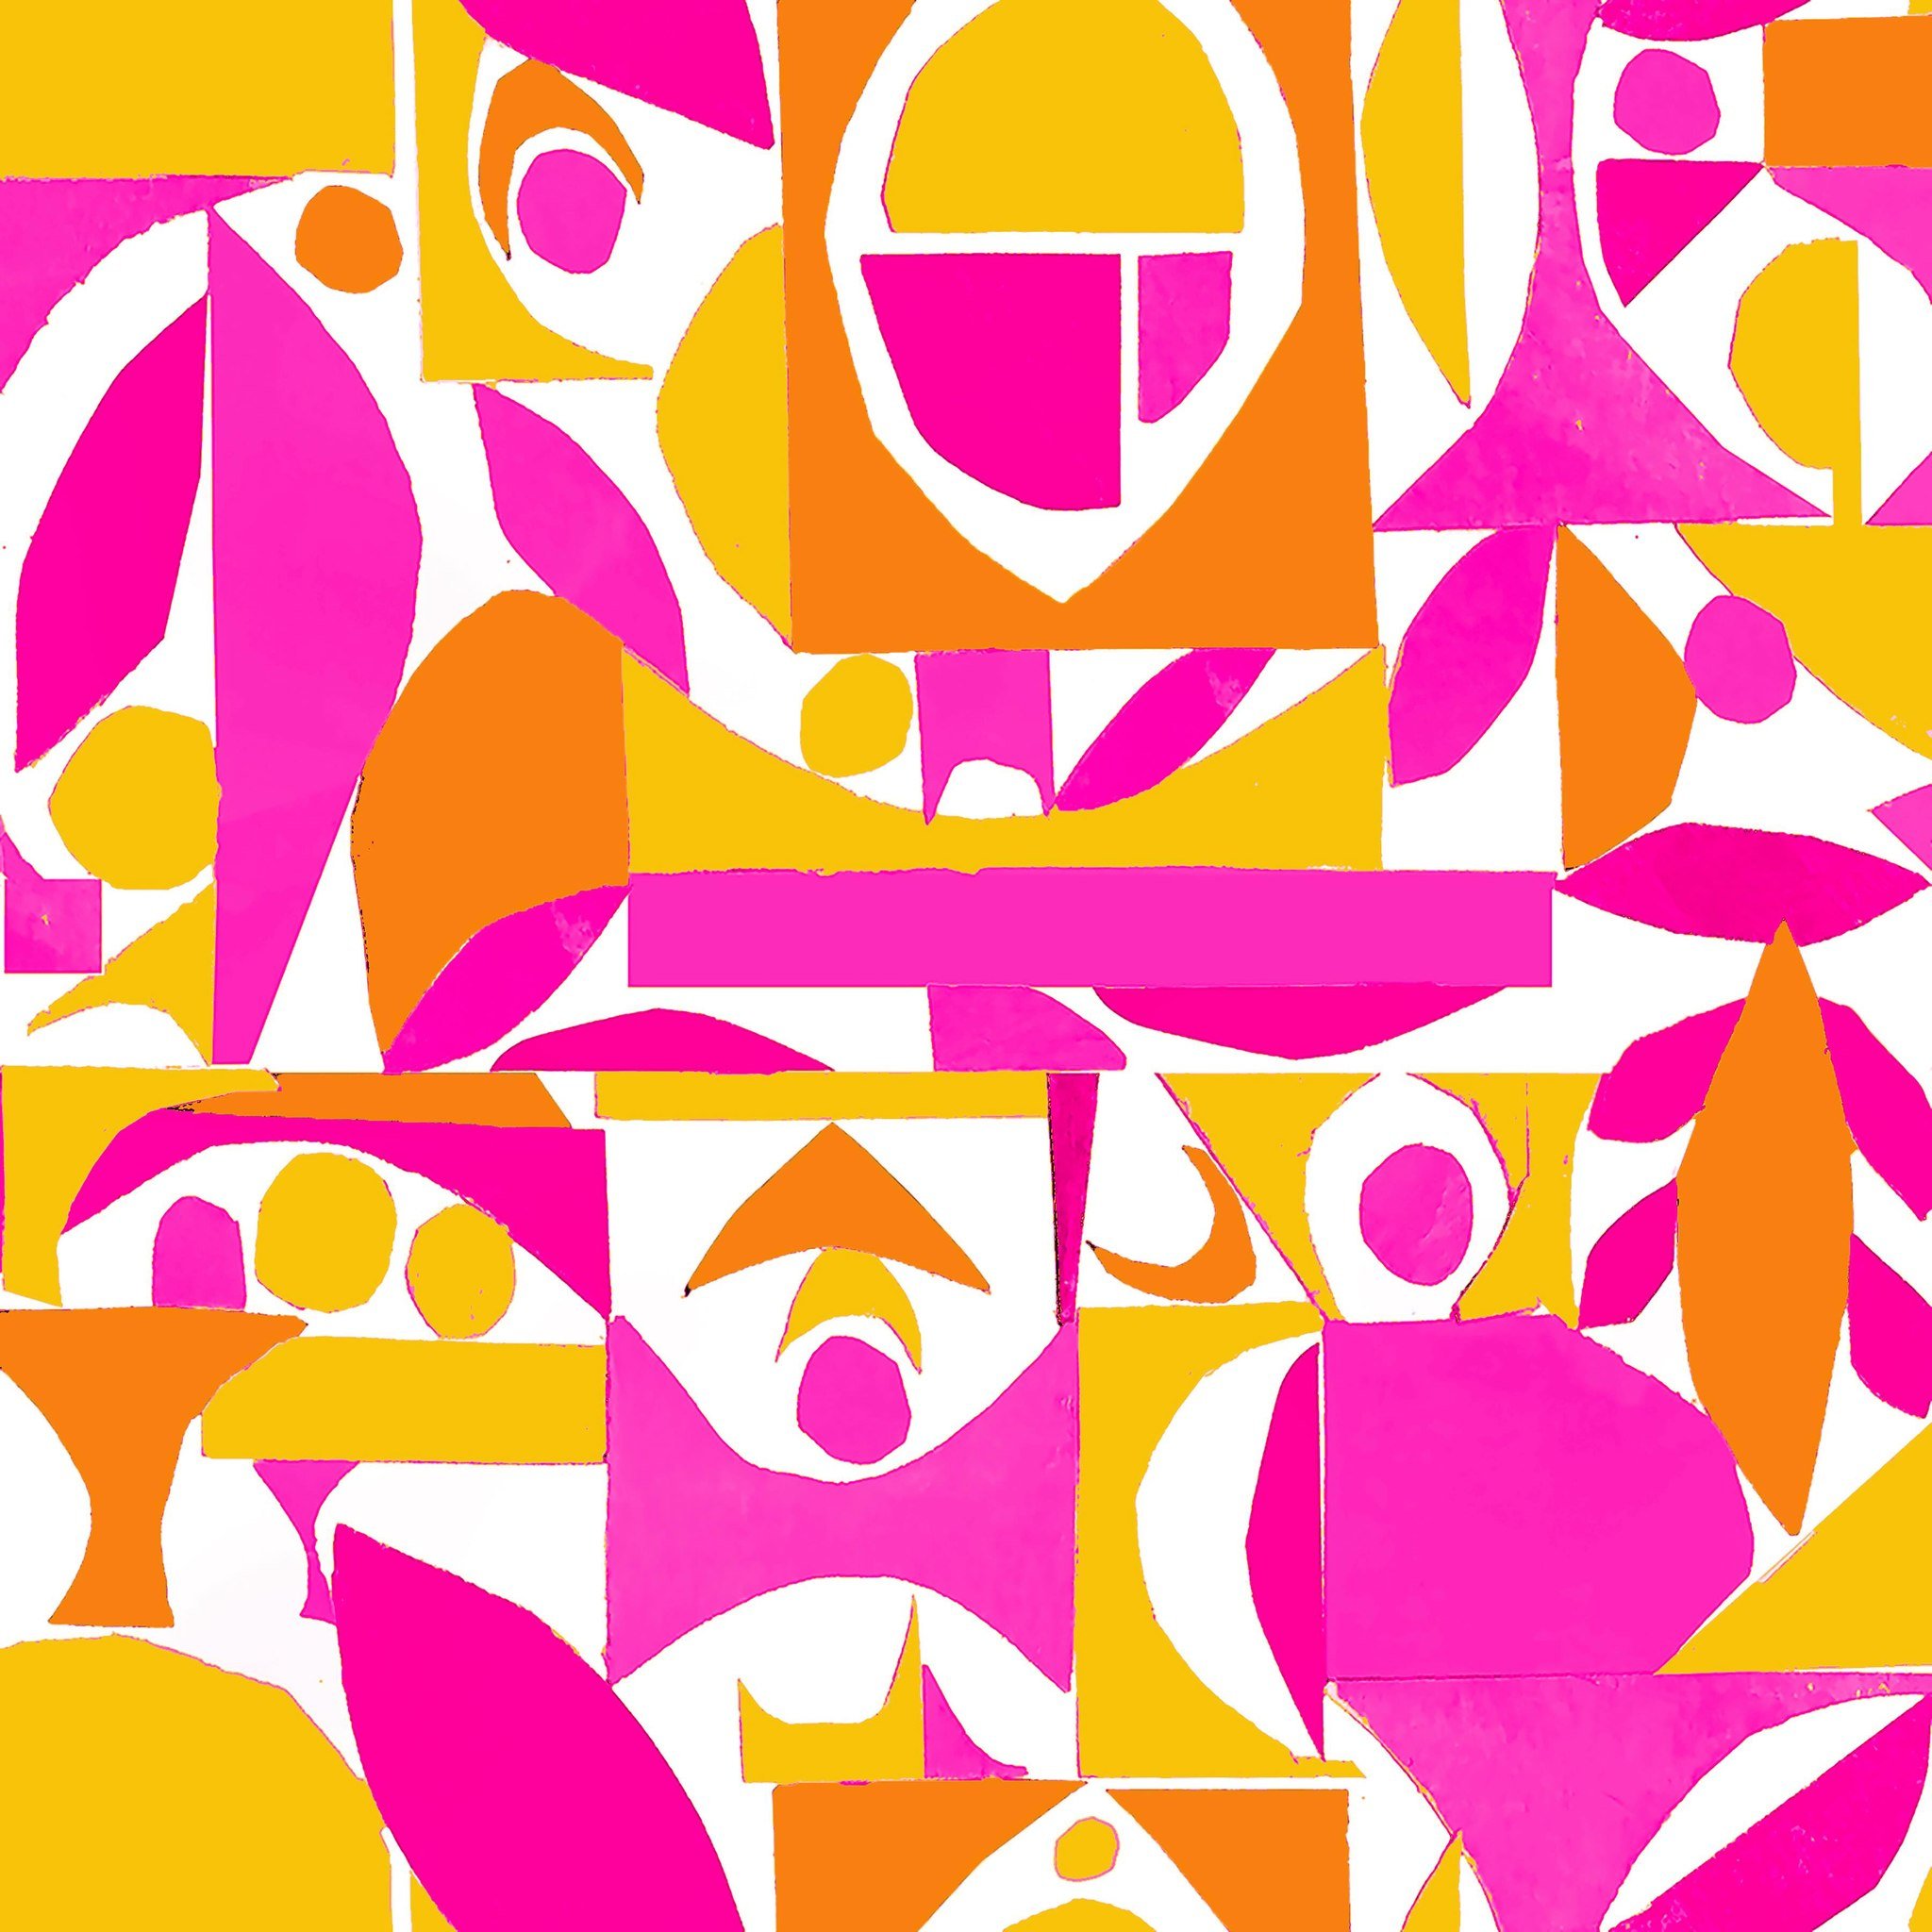 It&rsquo;s that time again 🥳 time to vote 🥳 I have entered this pattern, &lsquo;tango in the lemon tree&rsquo; into the @spoonflower design challenge.  The theme is: Party Wall designs: &ldquo;Give your walls something to dance about! Create a feel